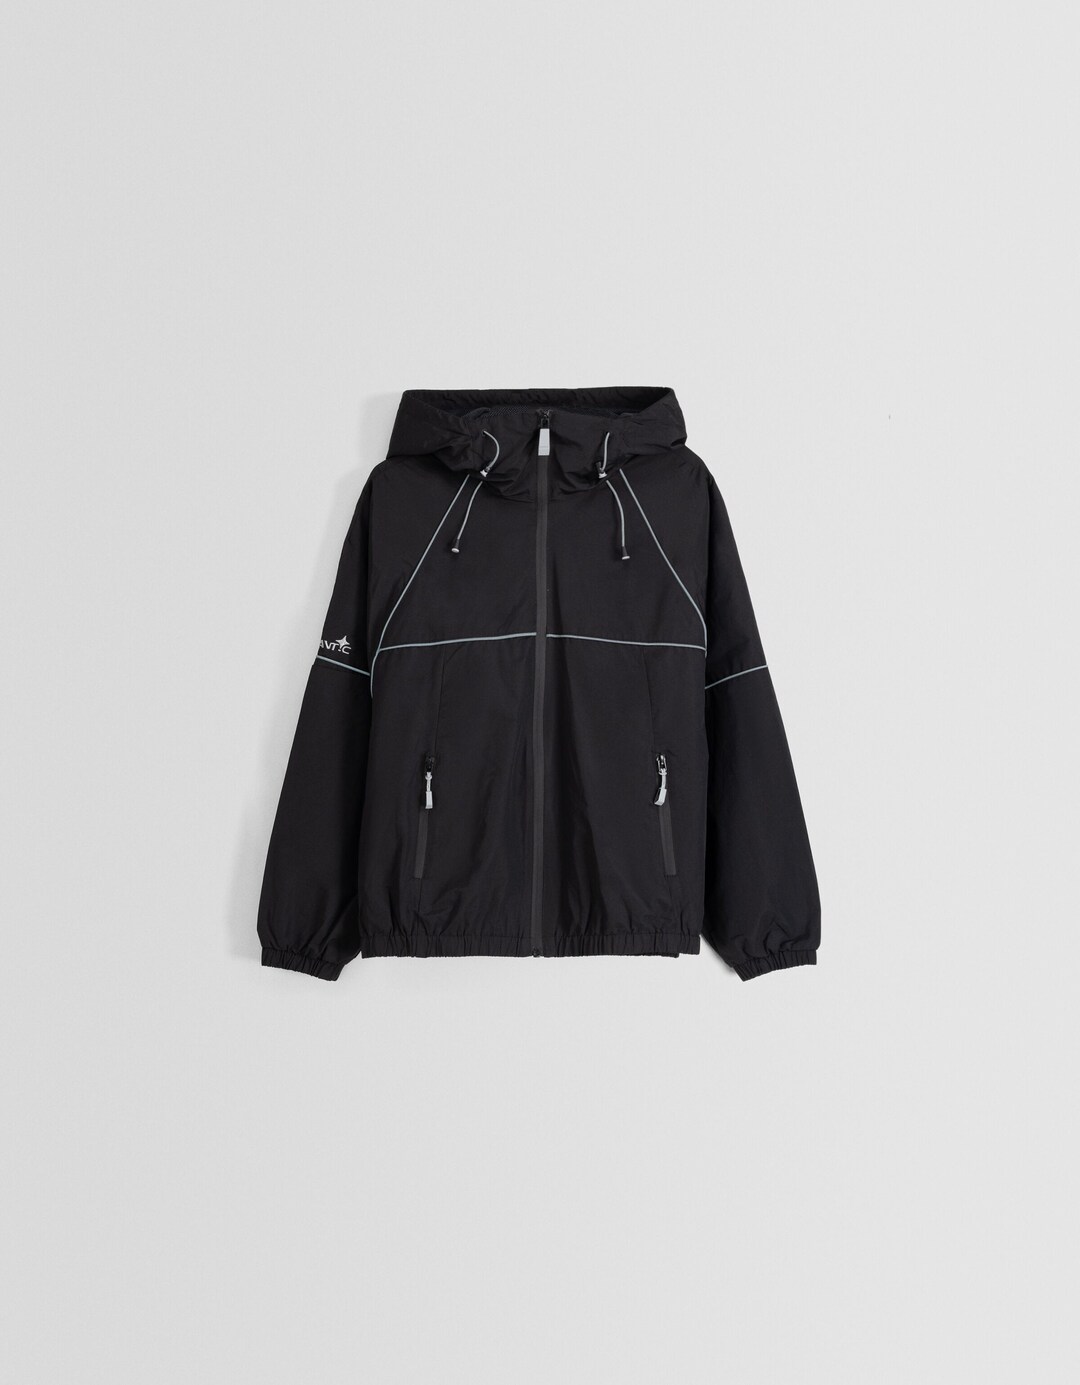 Hoodie jacket with reflective detail